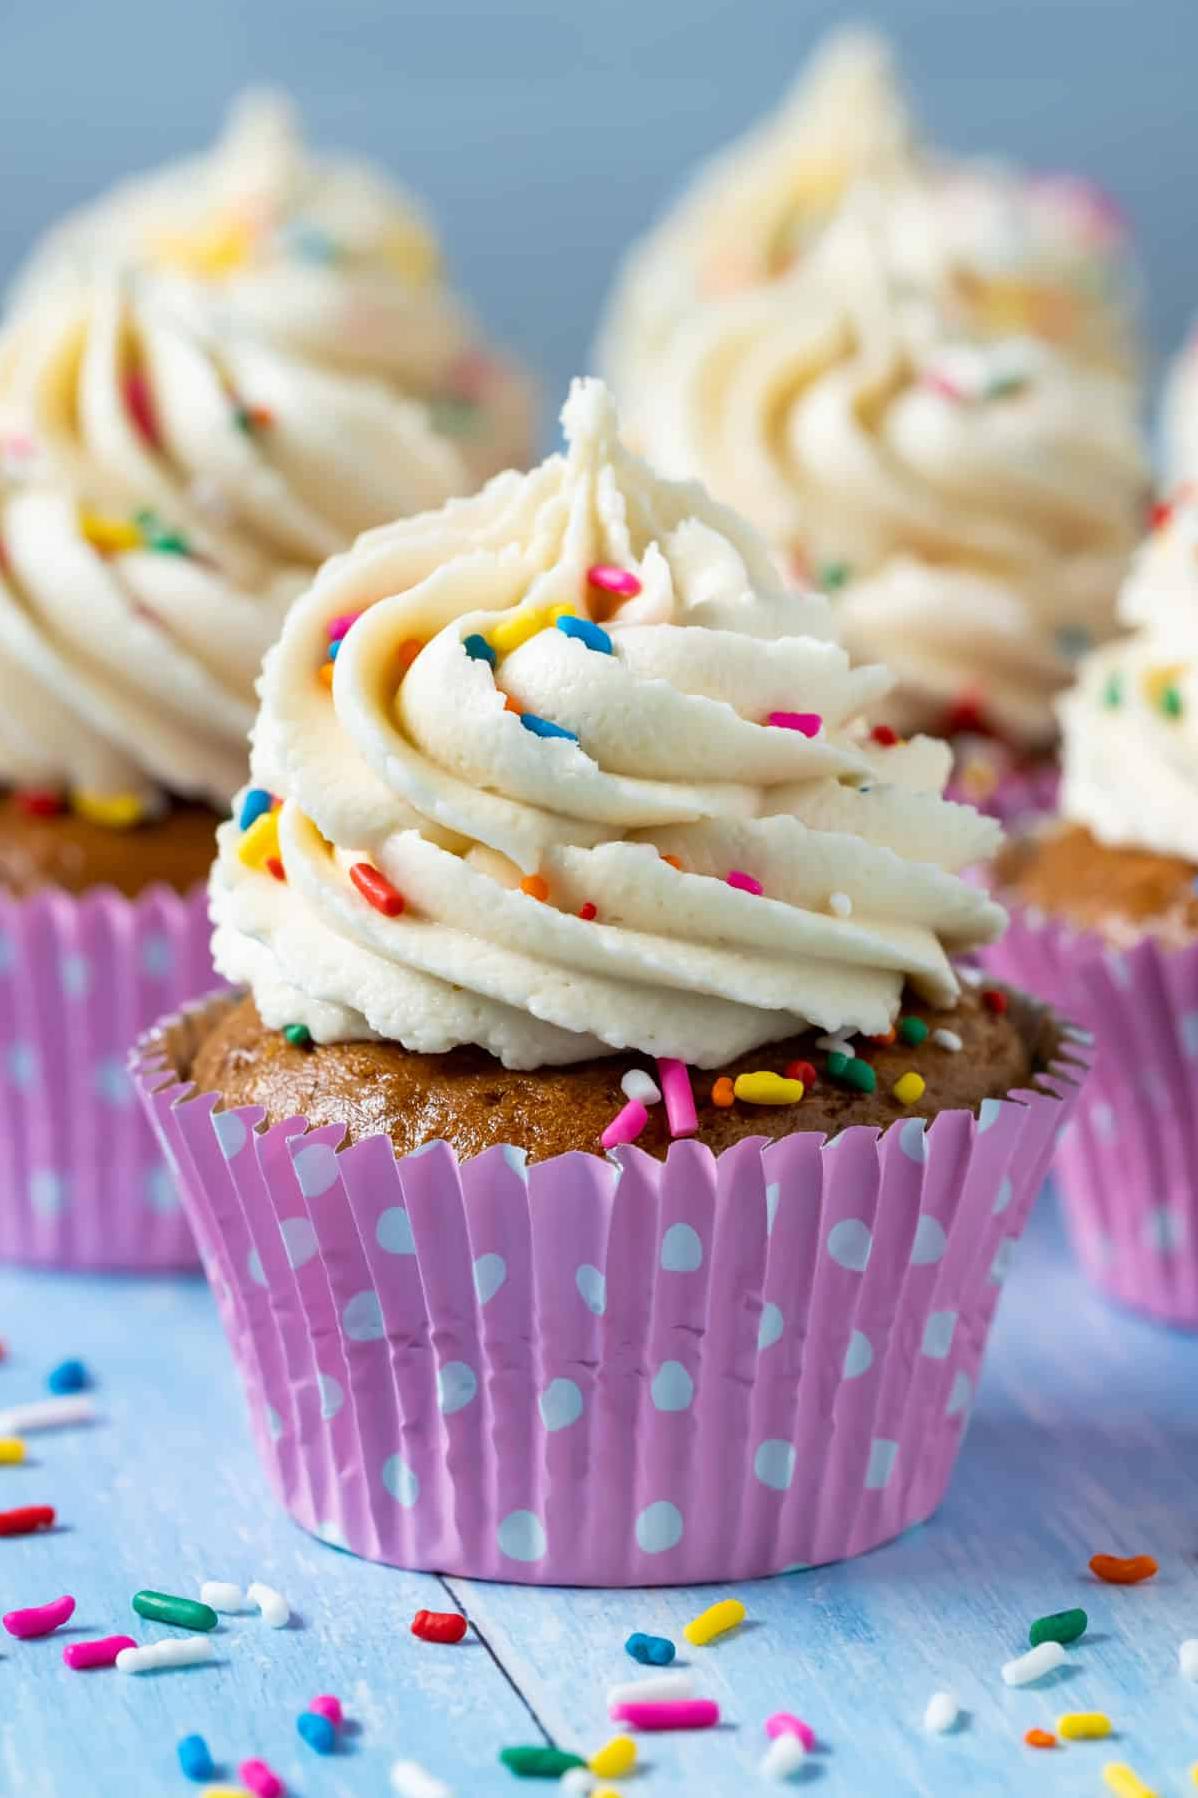  Say goodbye to boring GF and DF desserts with these amazing cupcakes/muffins.